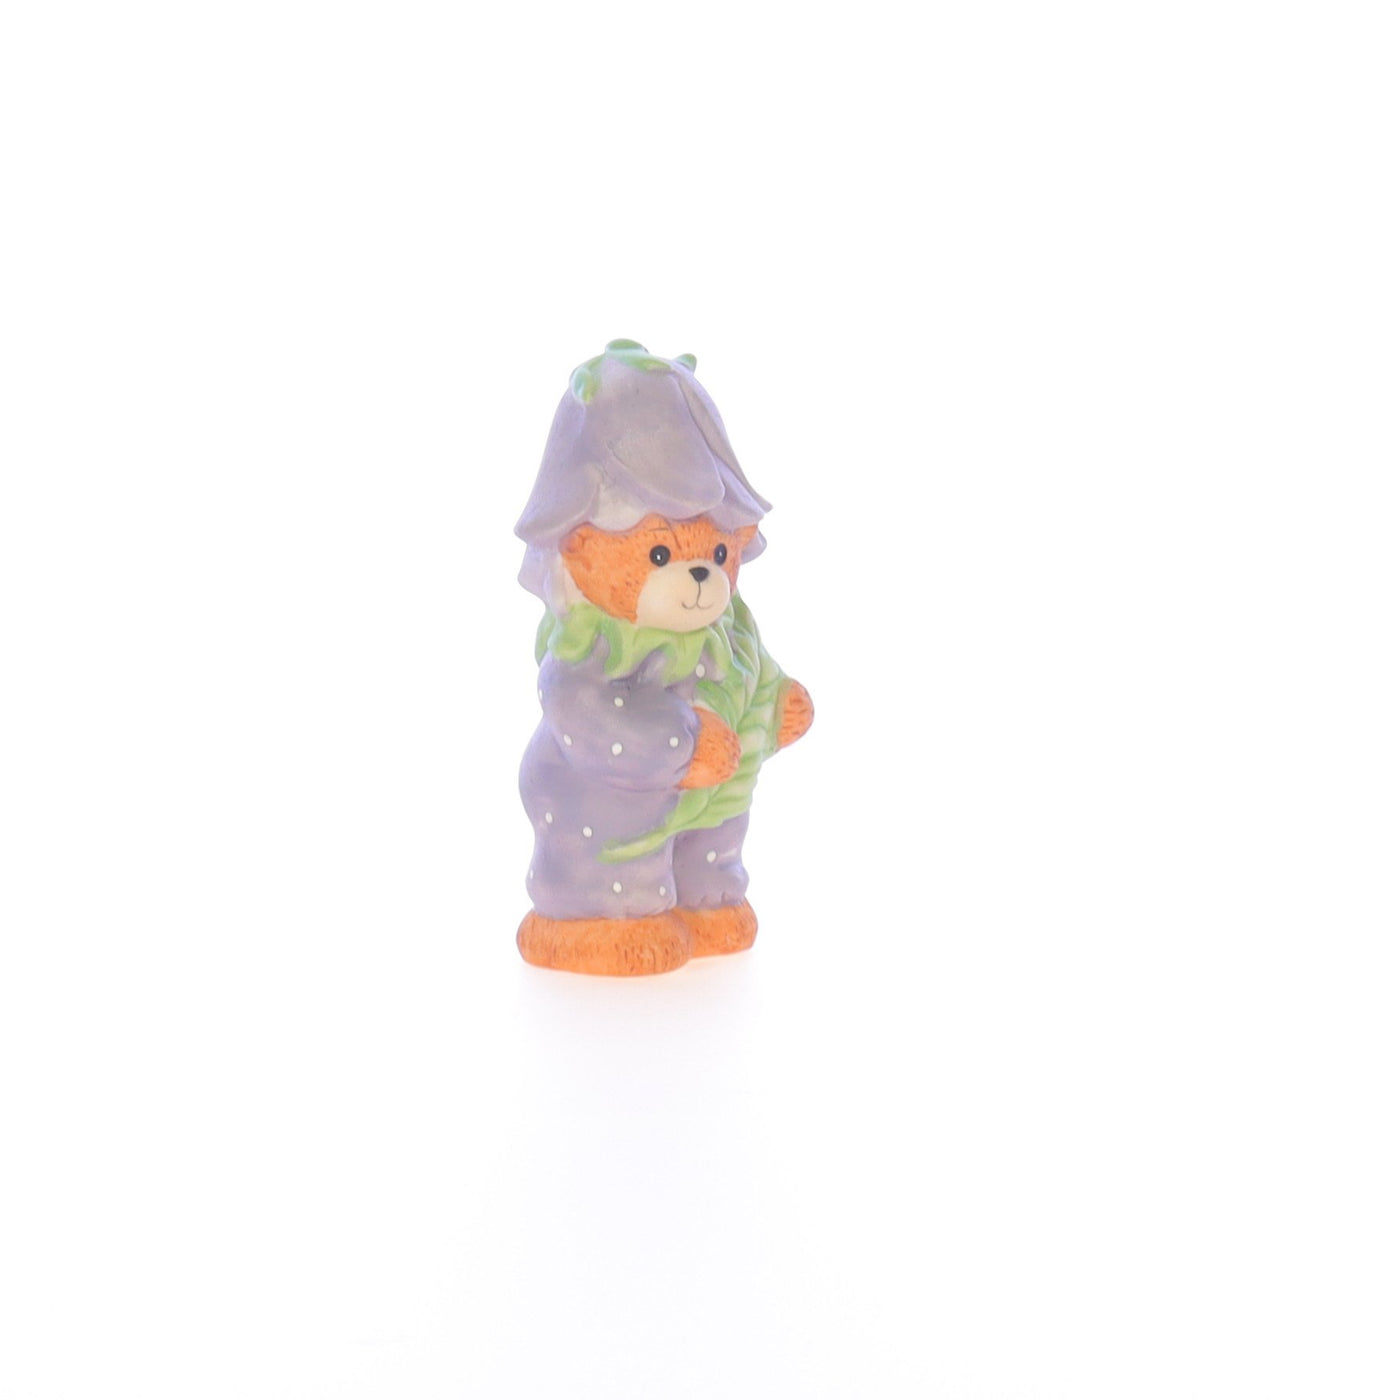 Lucy_And_Me_by_Lucy_Atwell_Porcelain_Figurine_Bear_with_Purple_Flower_Costume_Lucy_Unknown_007_08